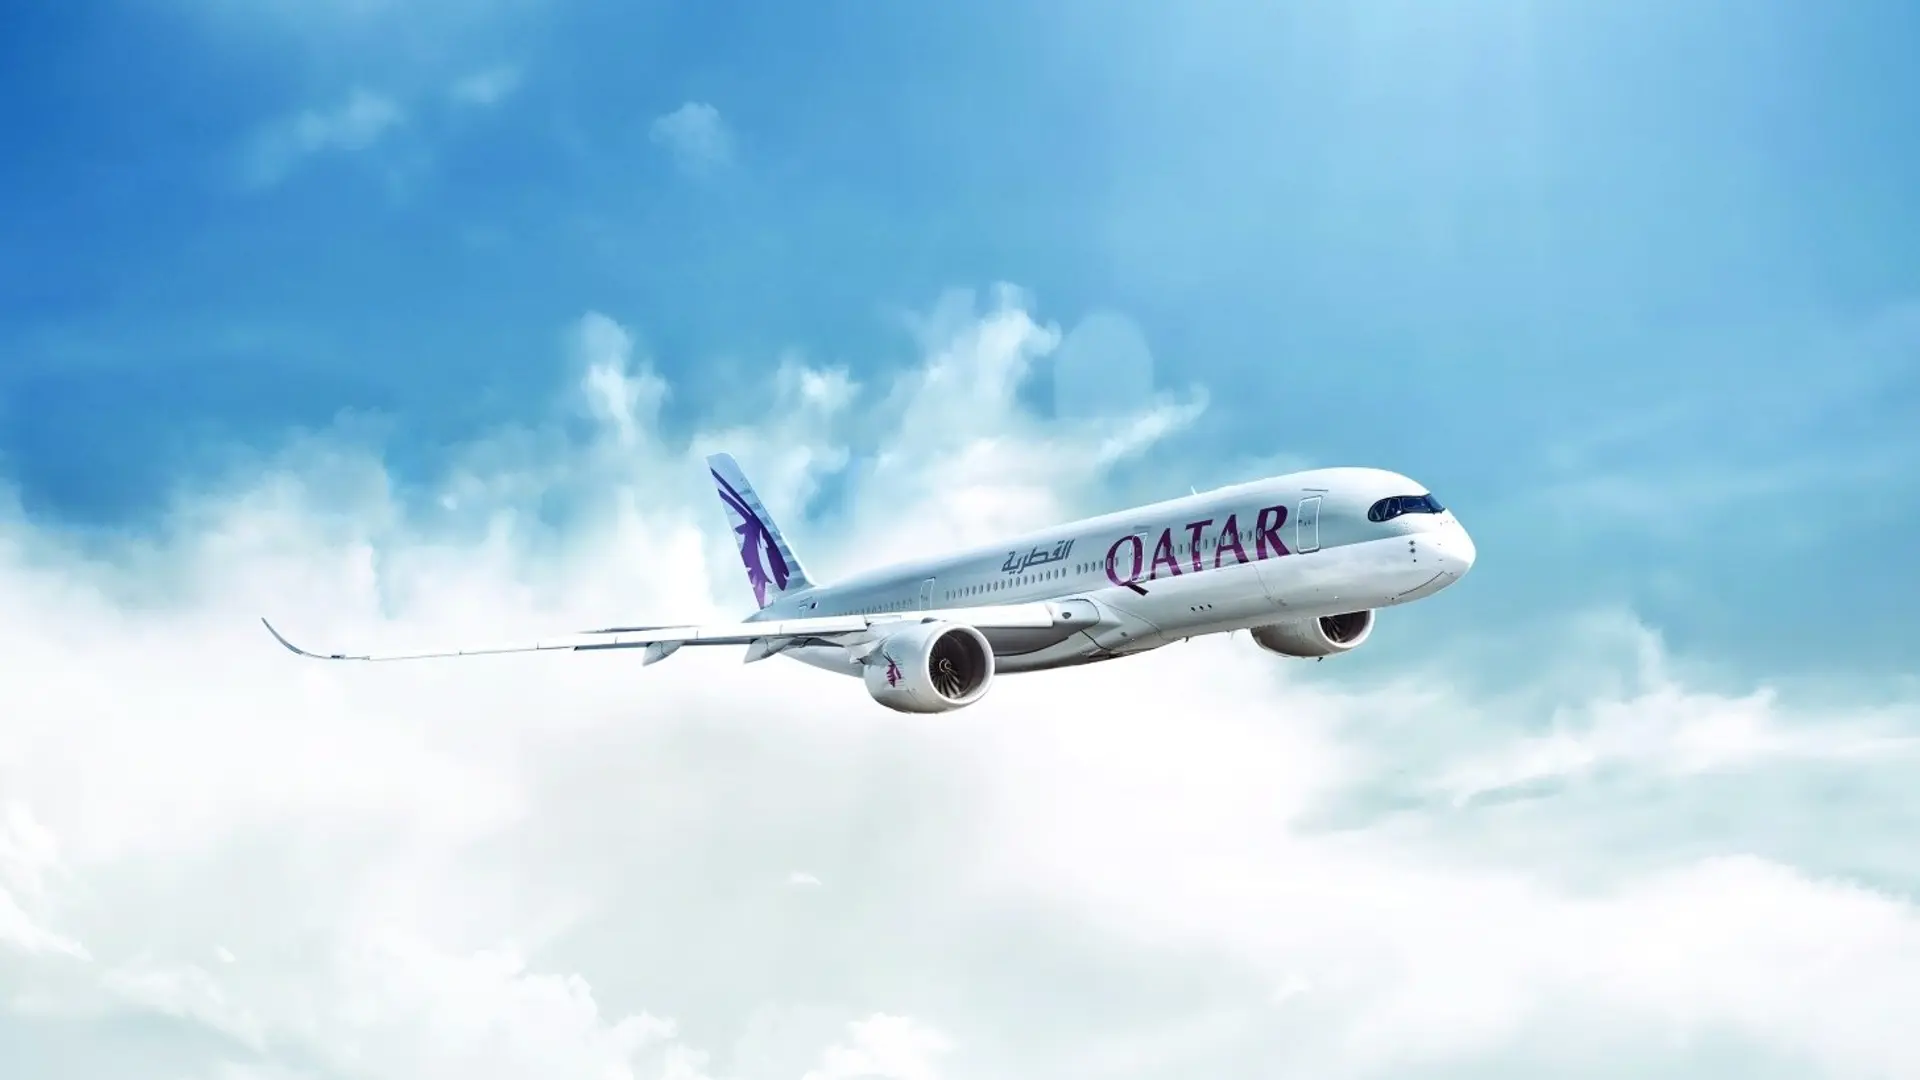 Airlines News - Qatar Airways unveils a new partner for its premium cabin amenity kits